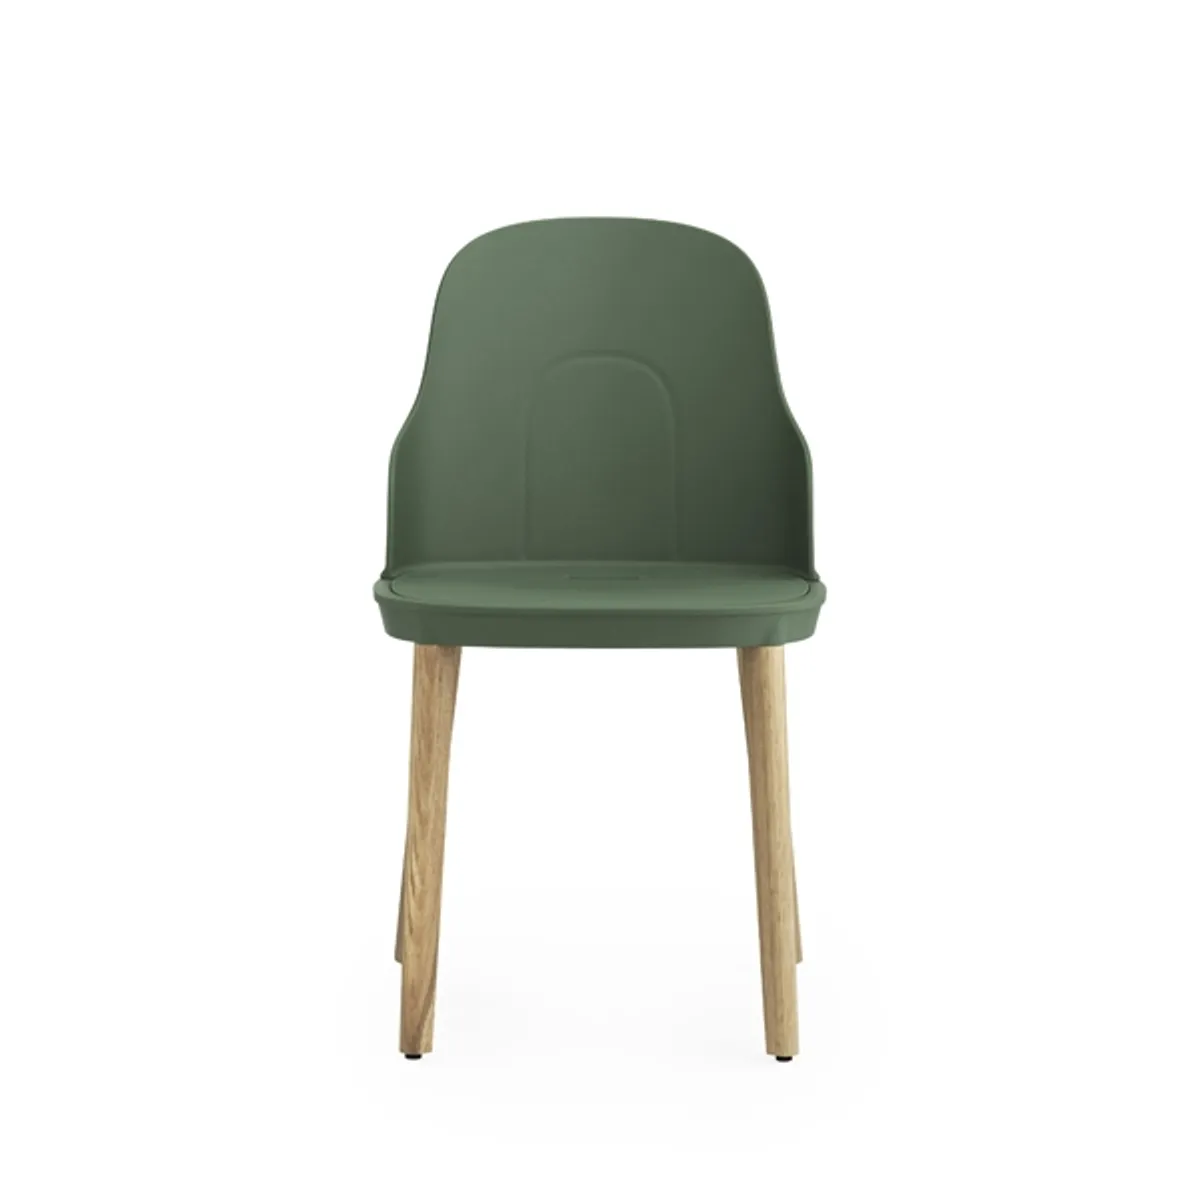 Bon wood chair Inside Out Contracts2